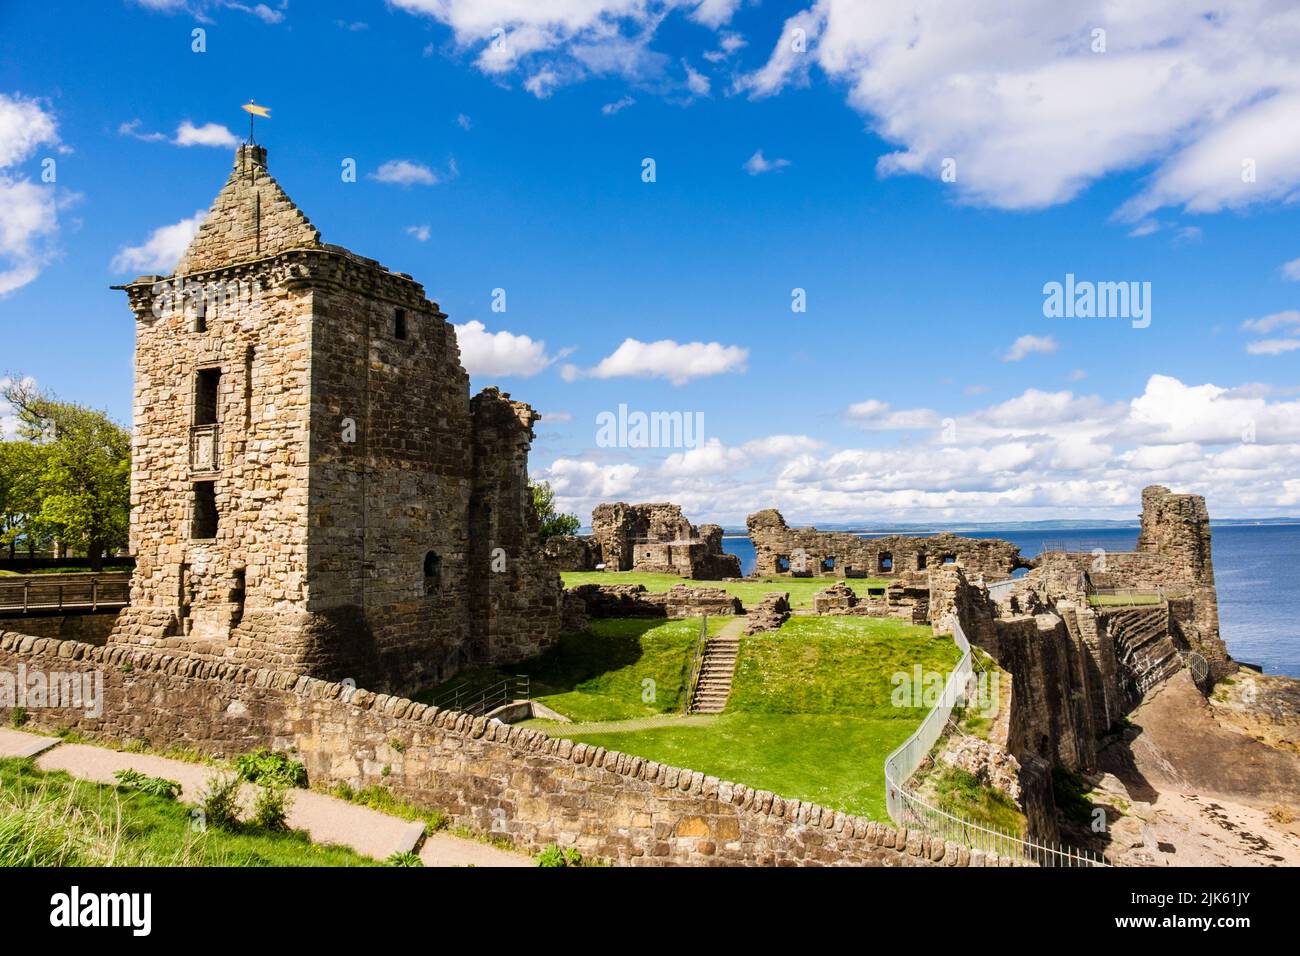 St Andrews castle ruins and grounds on North Sea coast. Royal Burgh of St Andrews, Fife, Scotland, UK, Britain Stock Photo